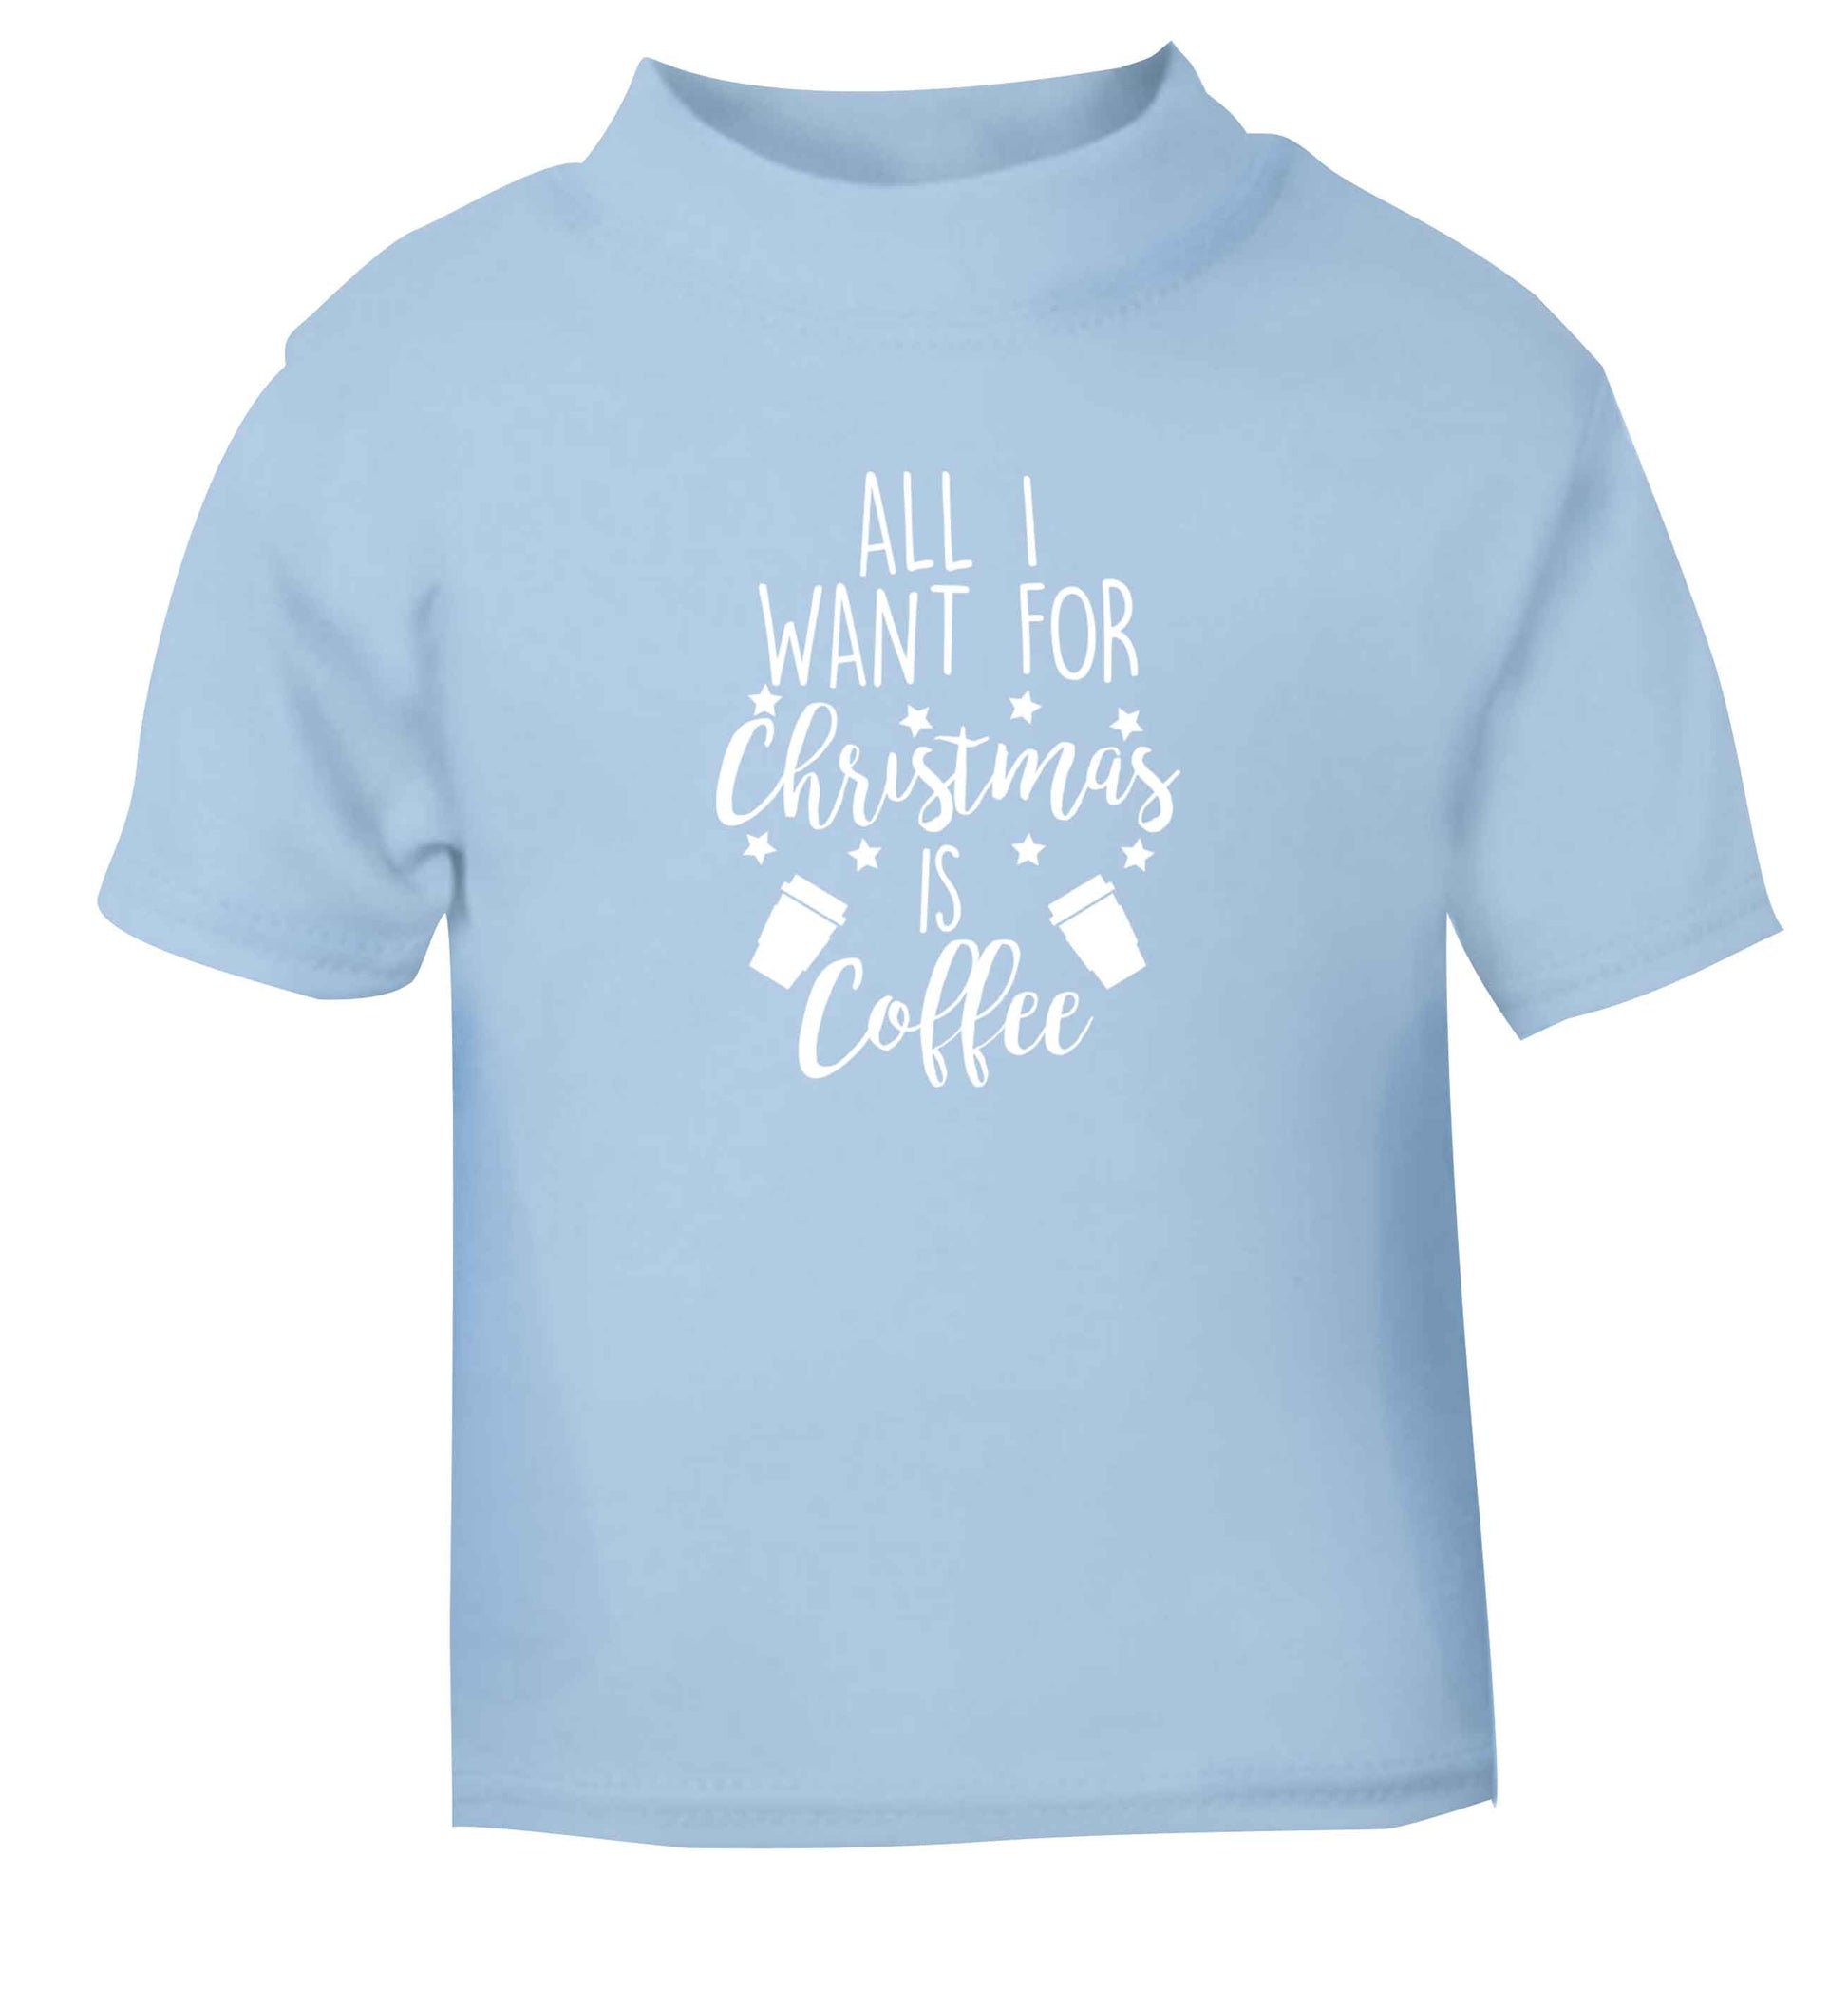 All I want for Christmas is coffee light blue Baby Toddler Tshirt 2 Years